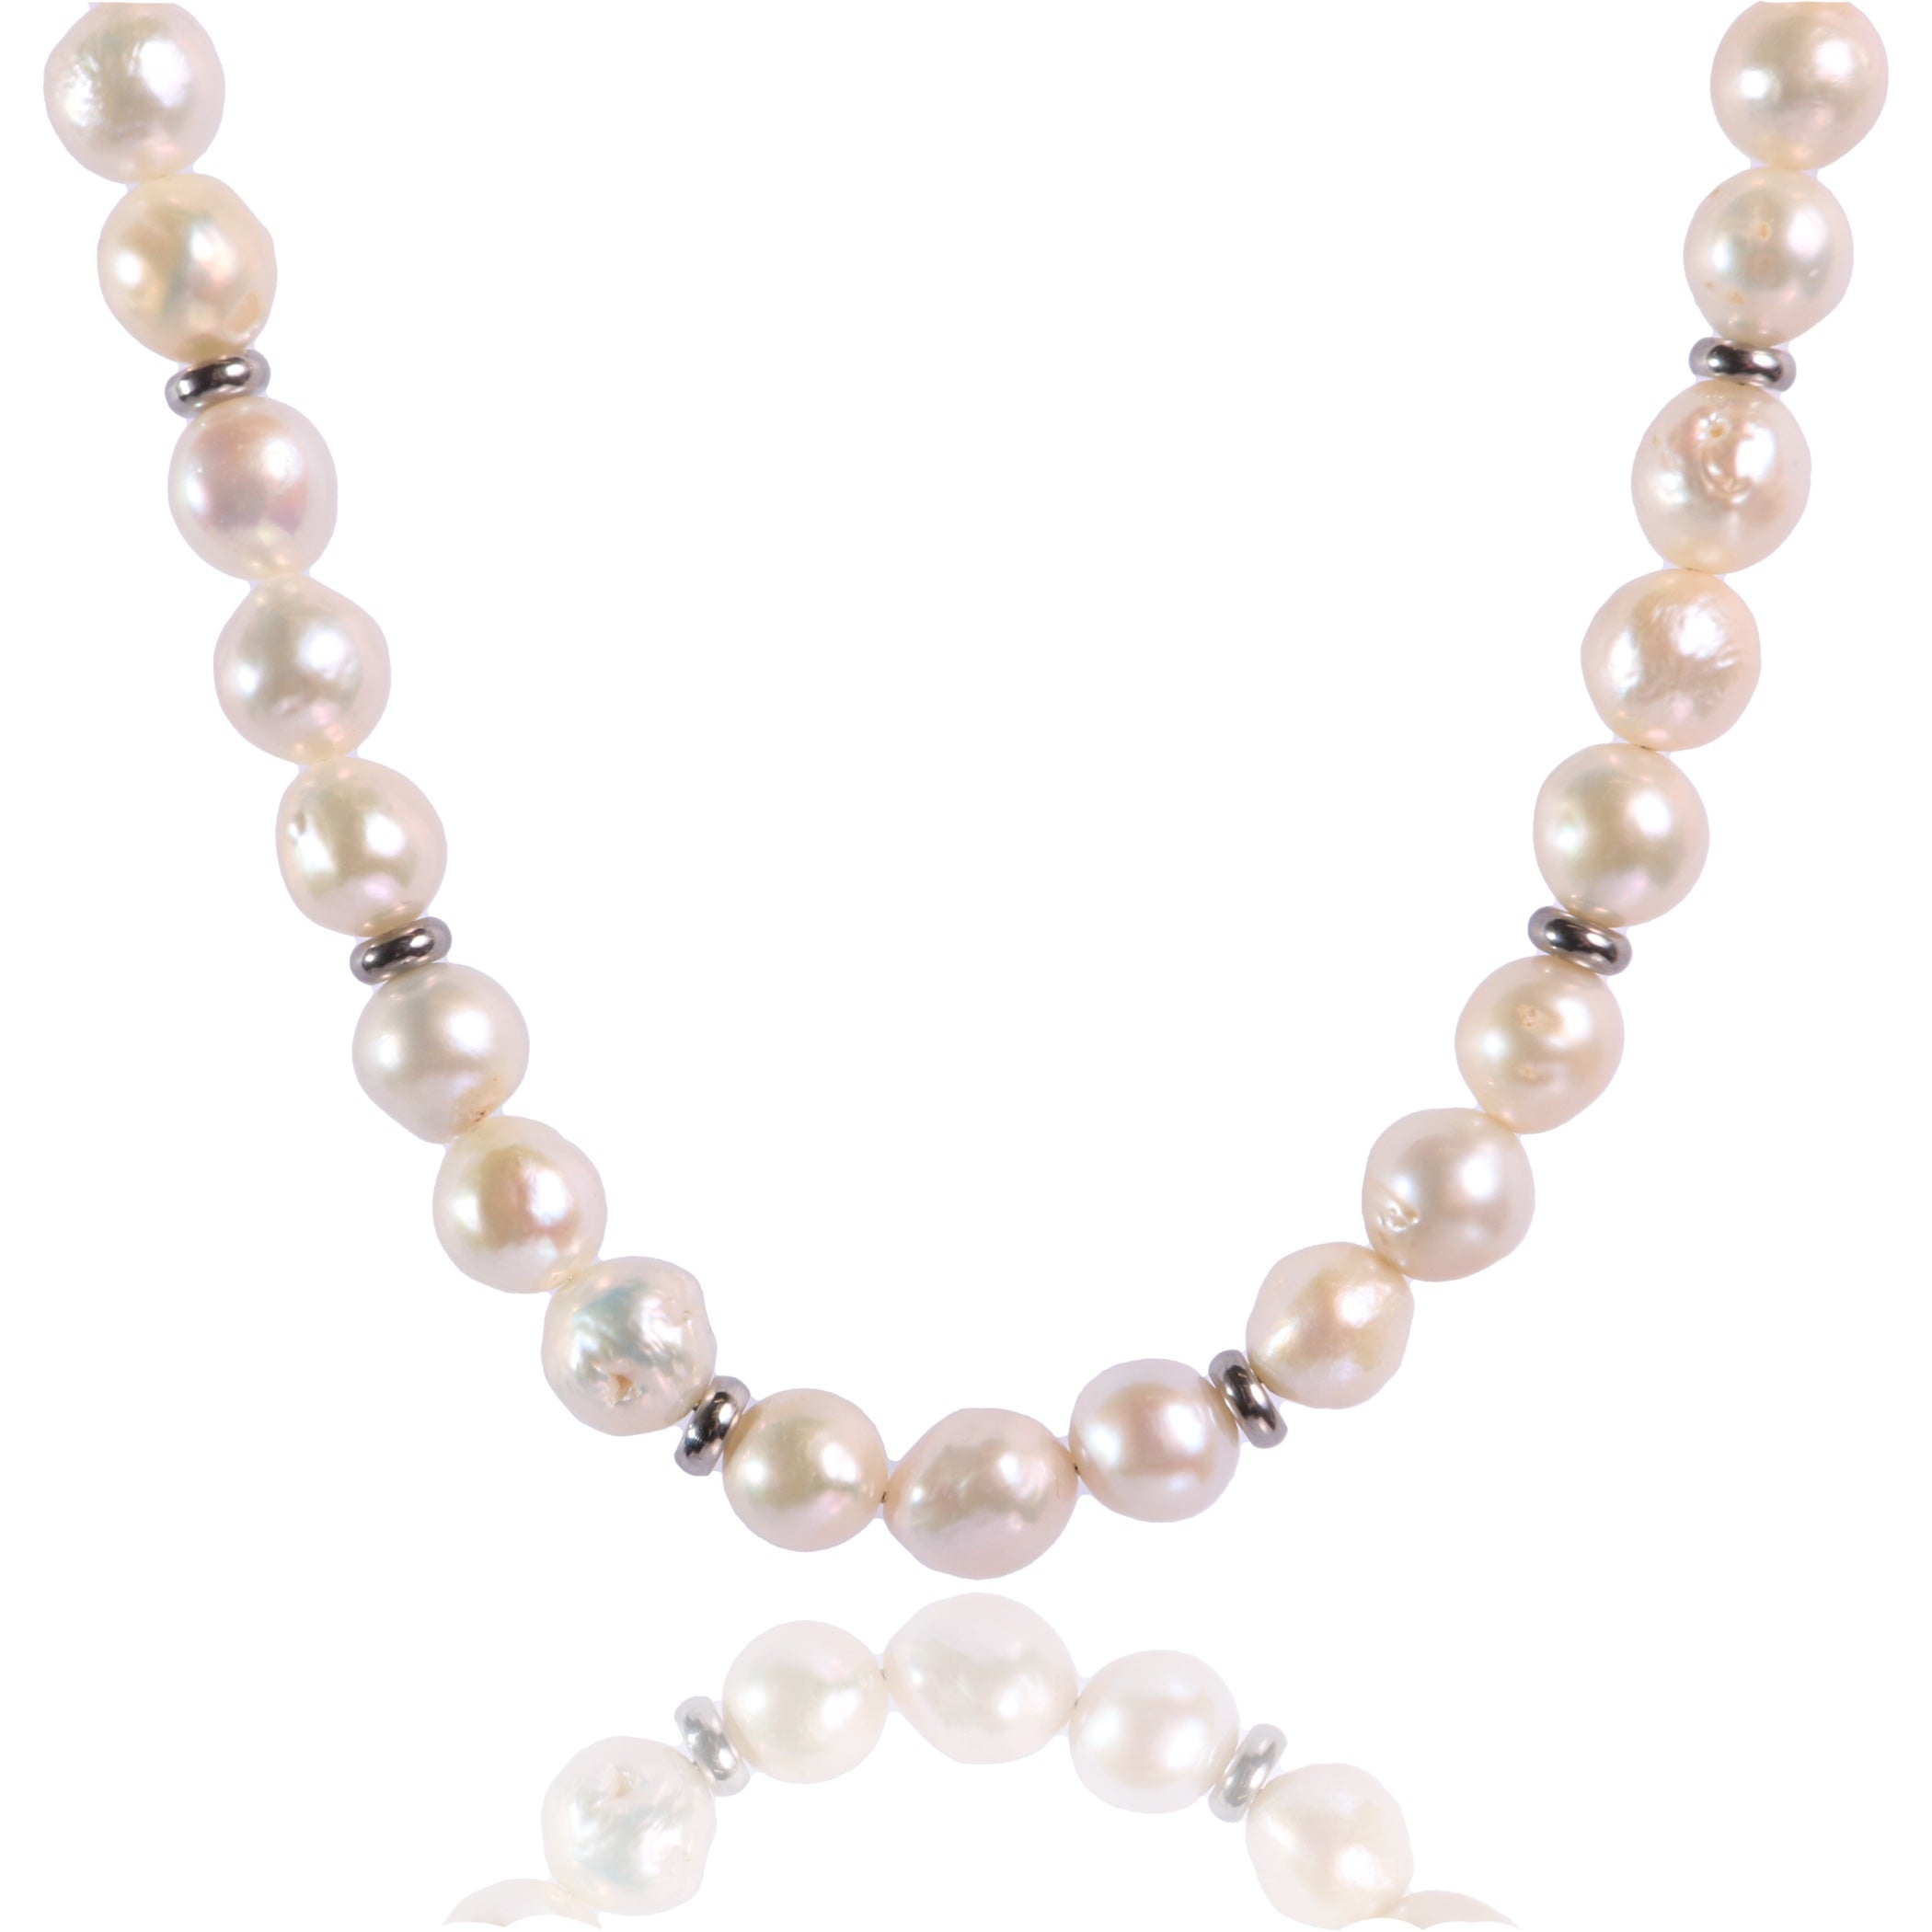 PEARL AND SILVER NICKLACE